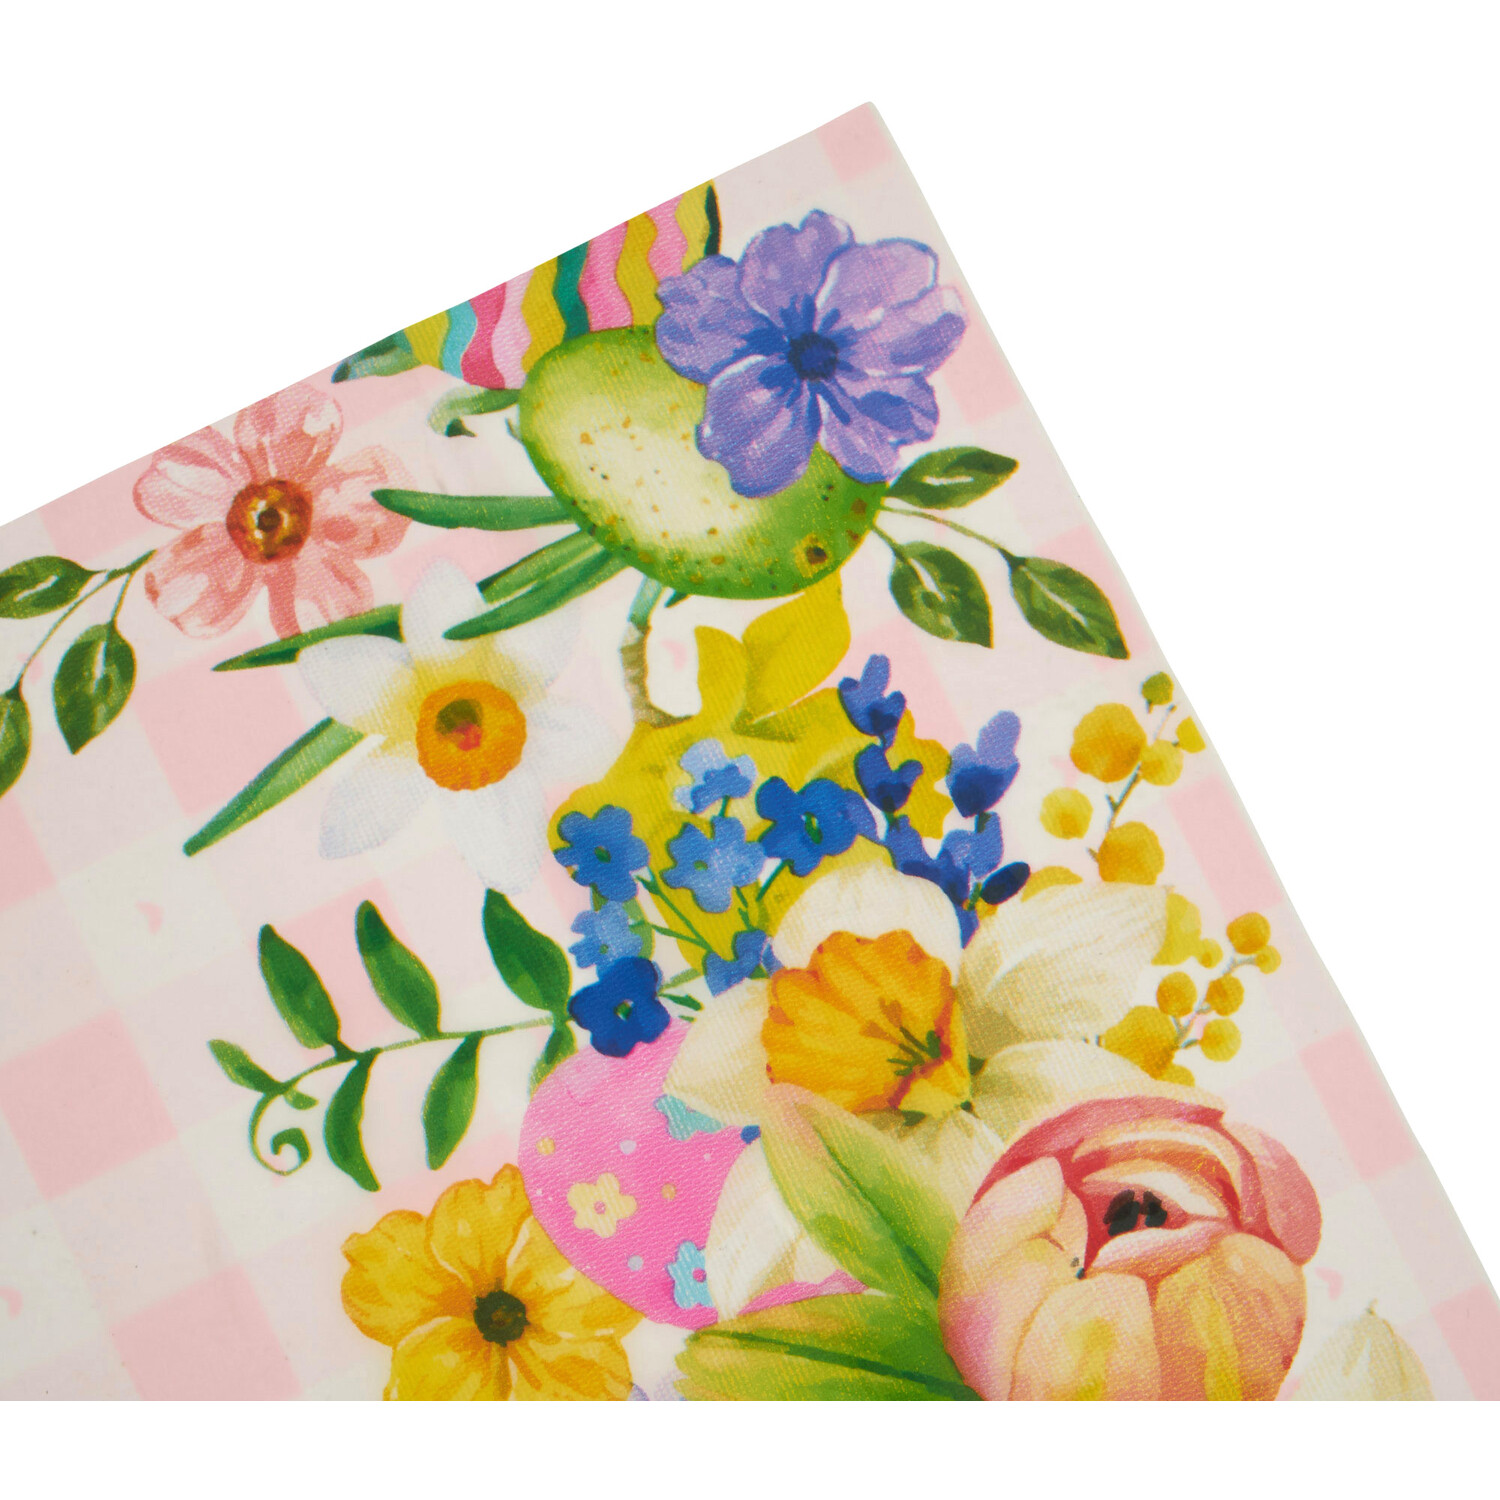 Easter Pink Tablecloth 85.5 x 152cm Image 3